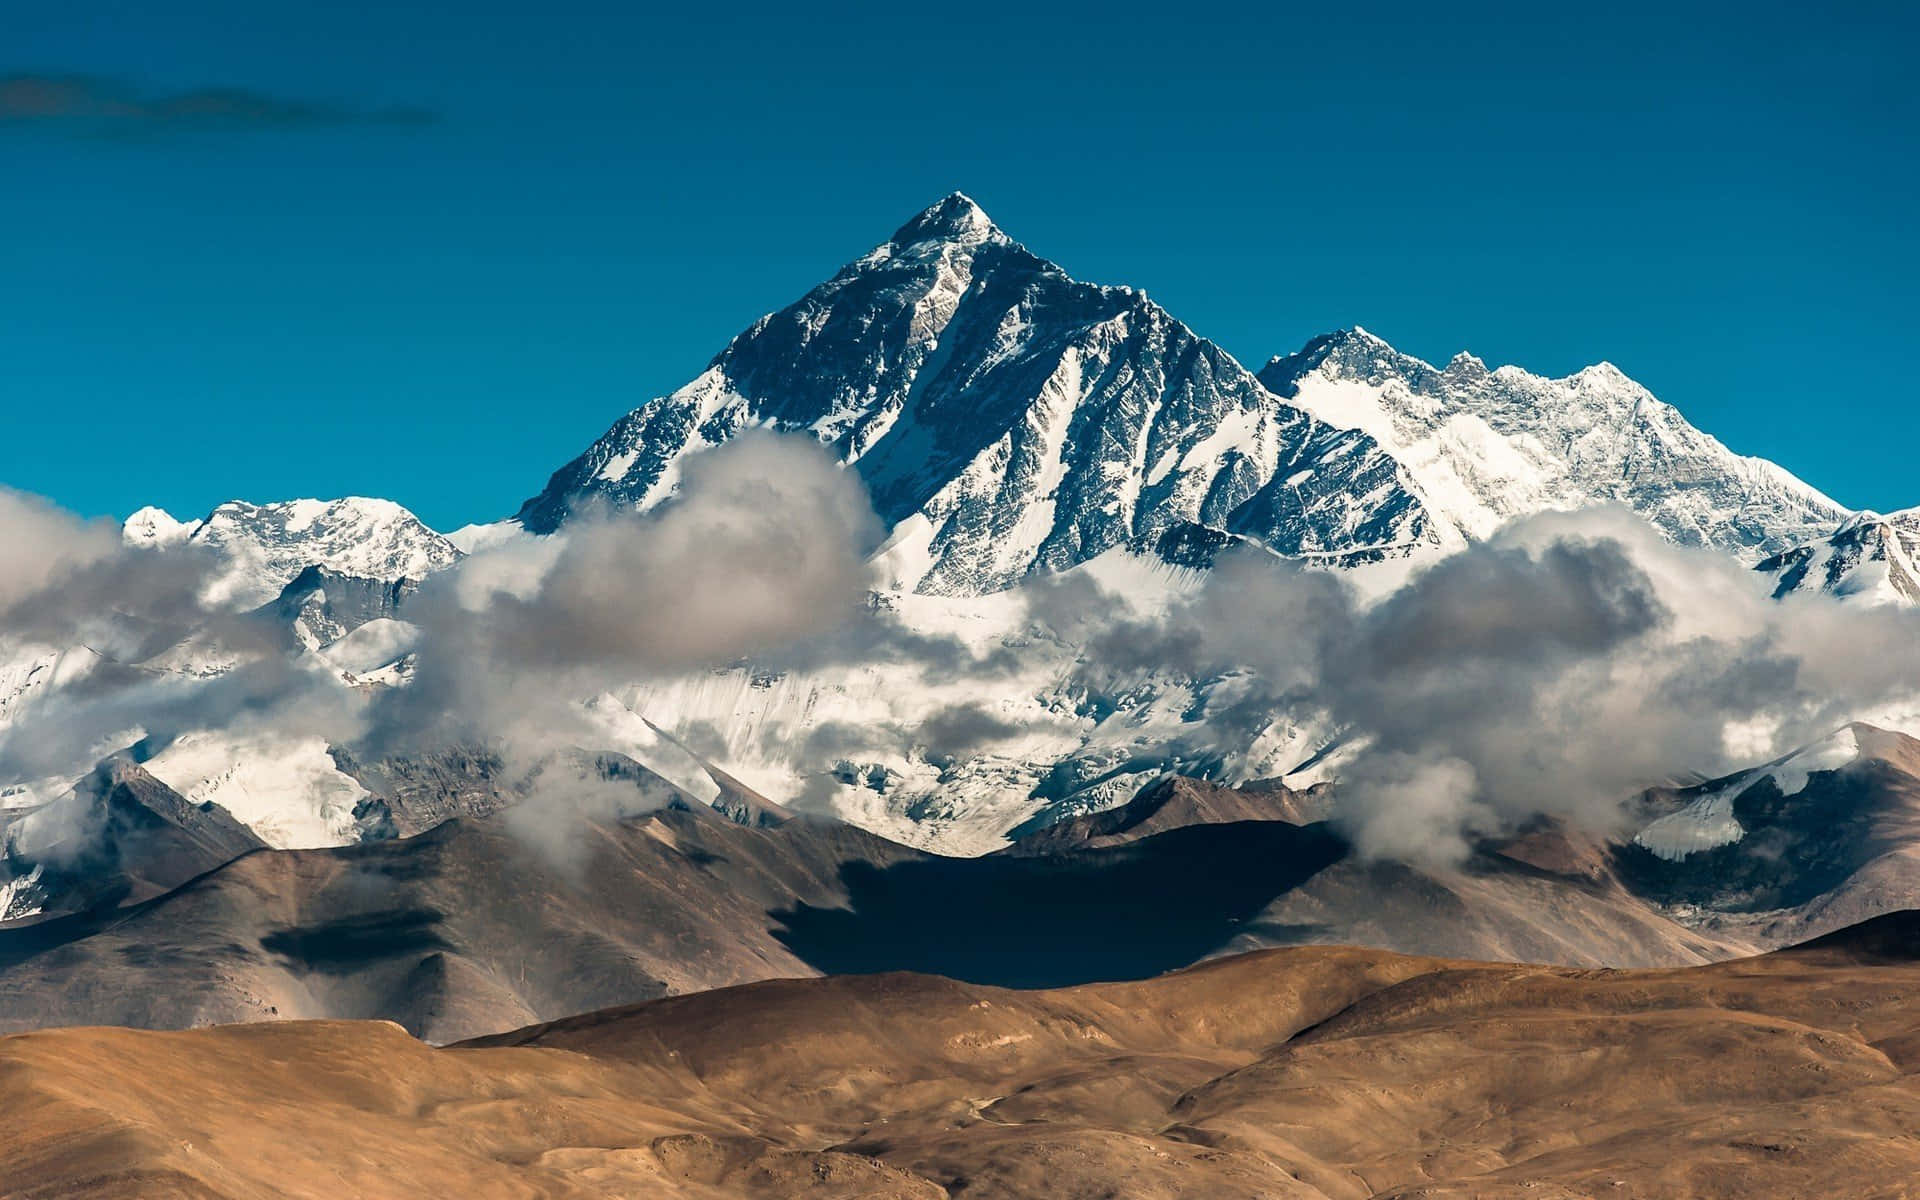 Breathtaking view of Mount Everest in Nepal